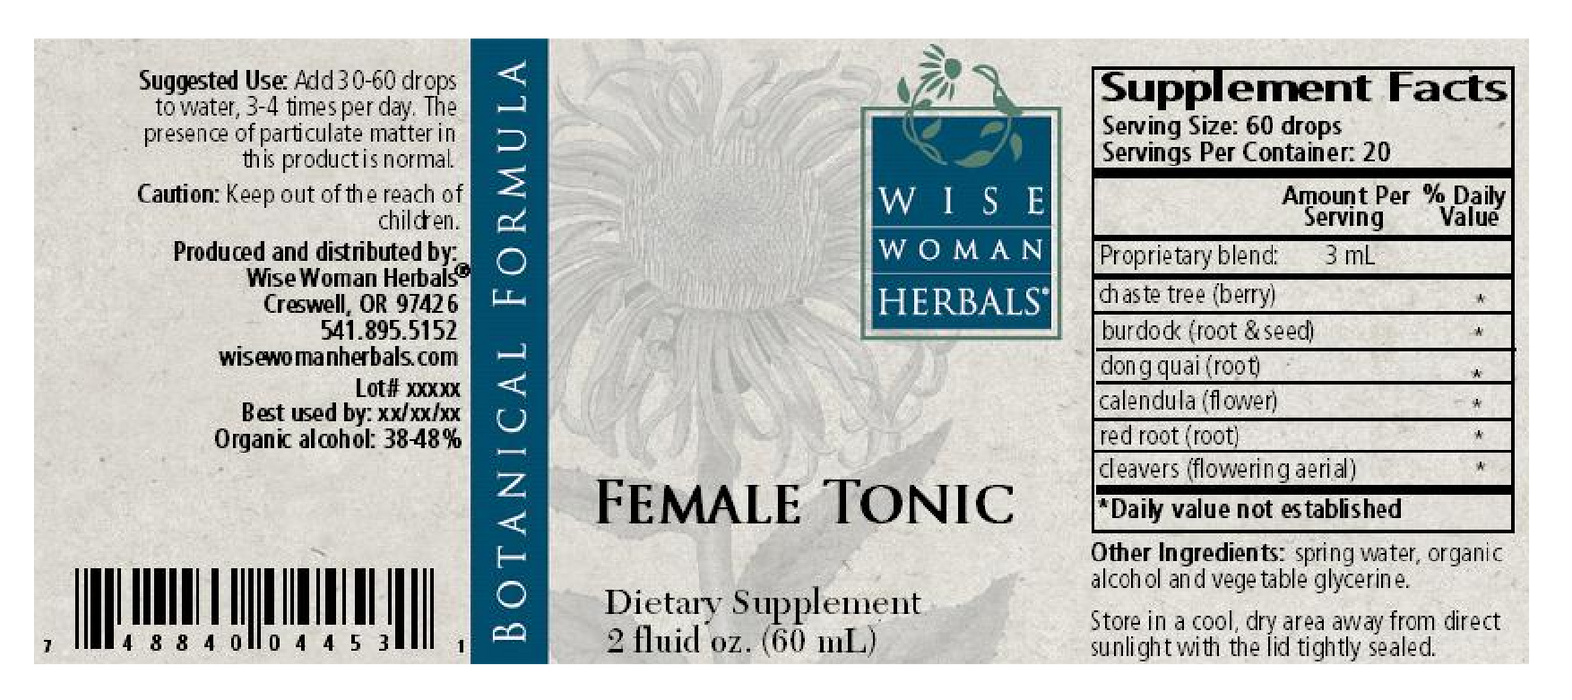 Wise Woman Herbals Female Tonic 2 oz